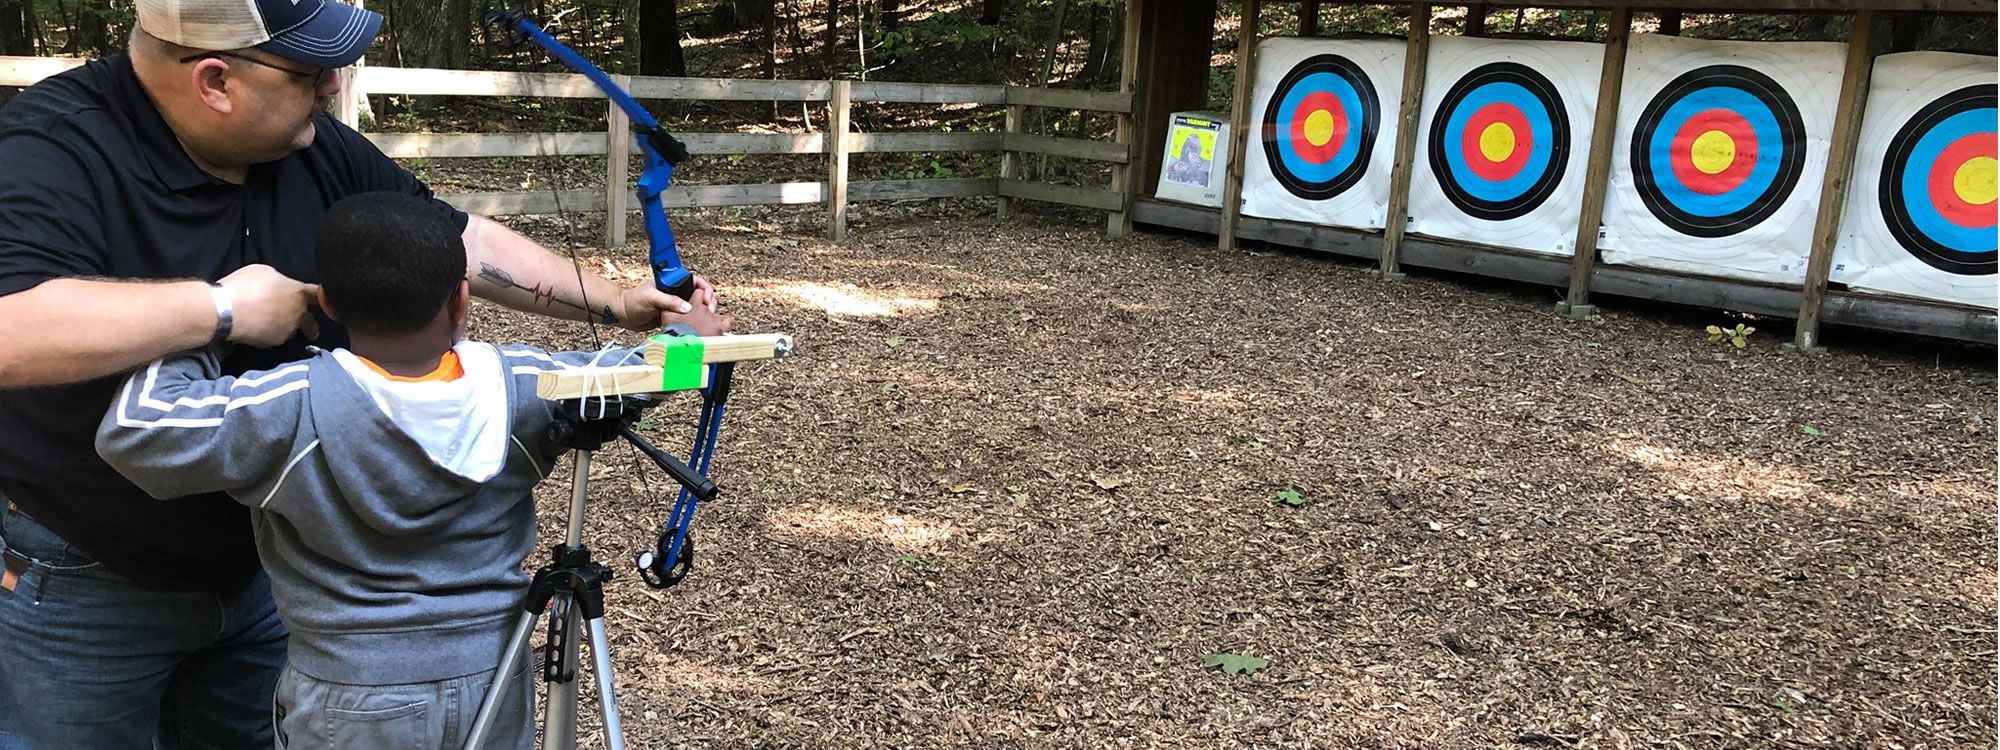 Student with instructor shooting bow and arrow at targets